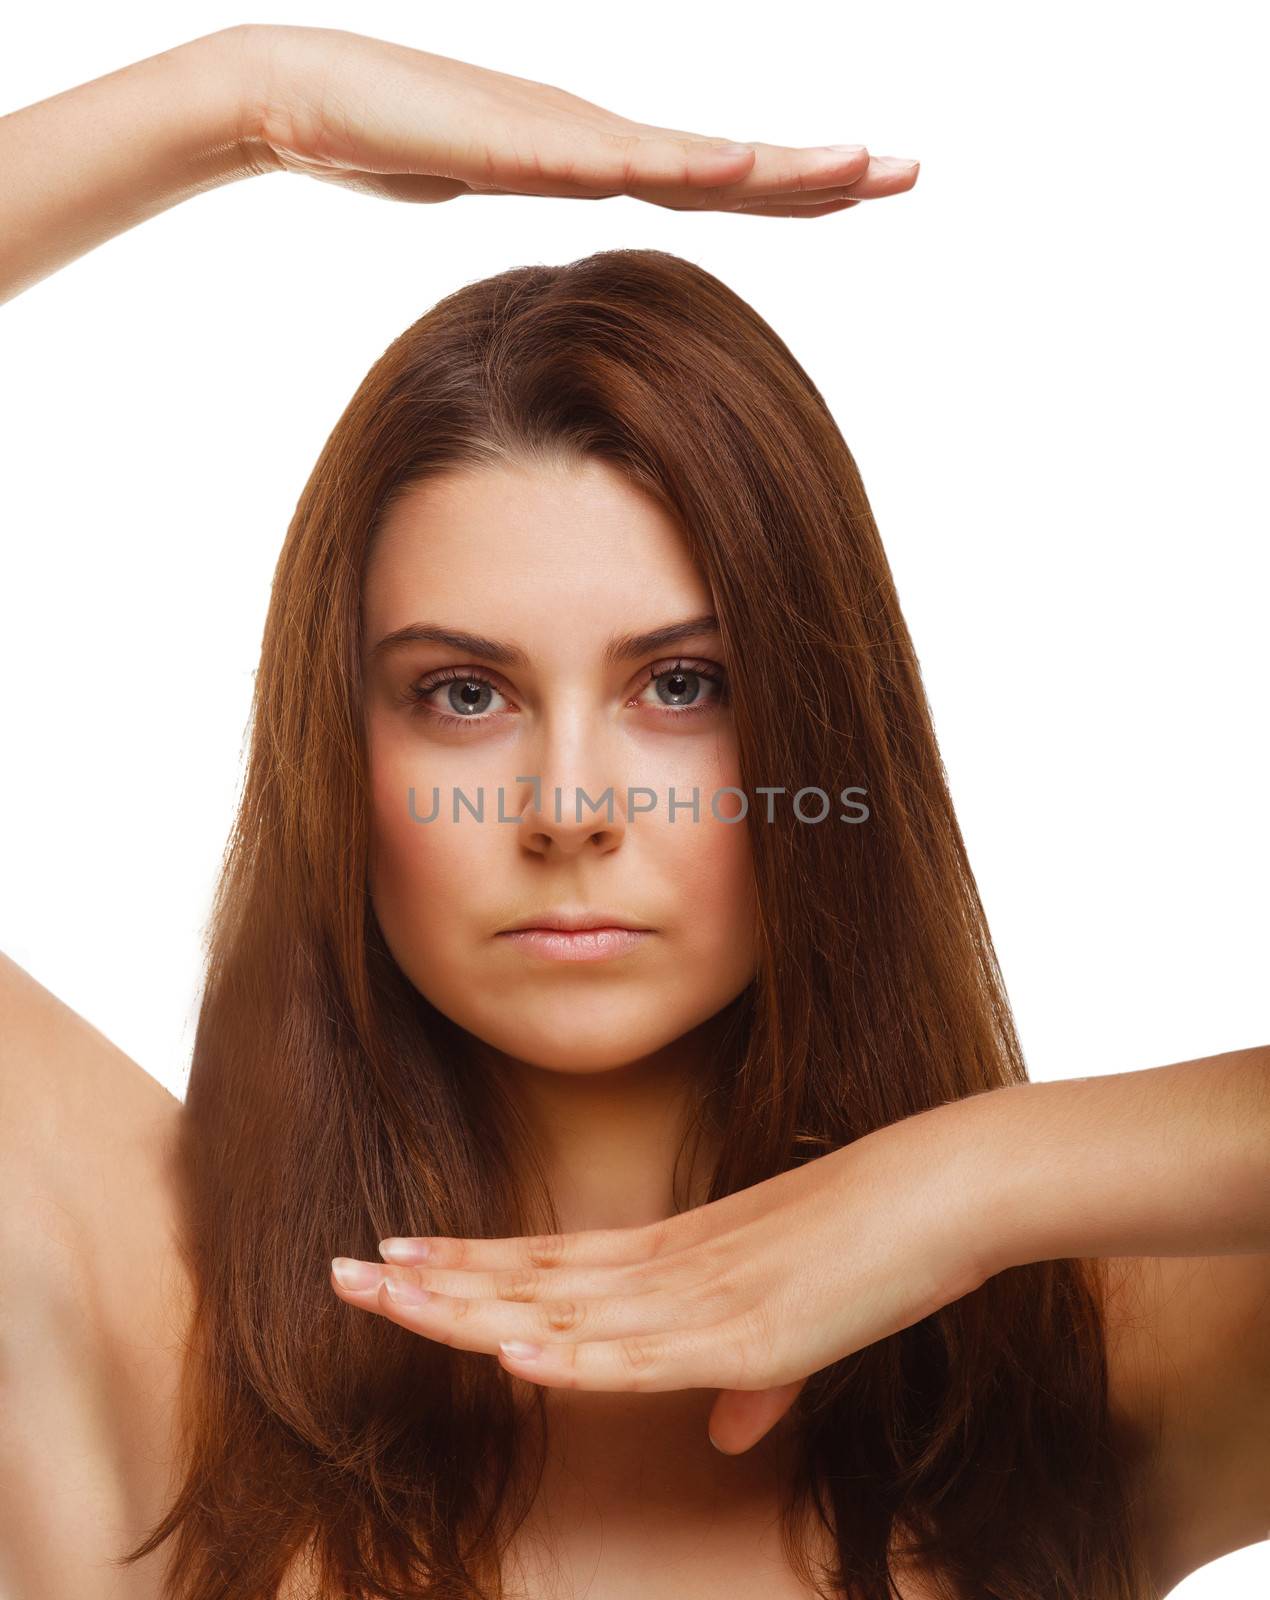 women perfect skin and hands eyes isolated by maxximmm